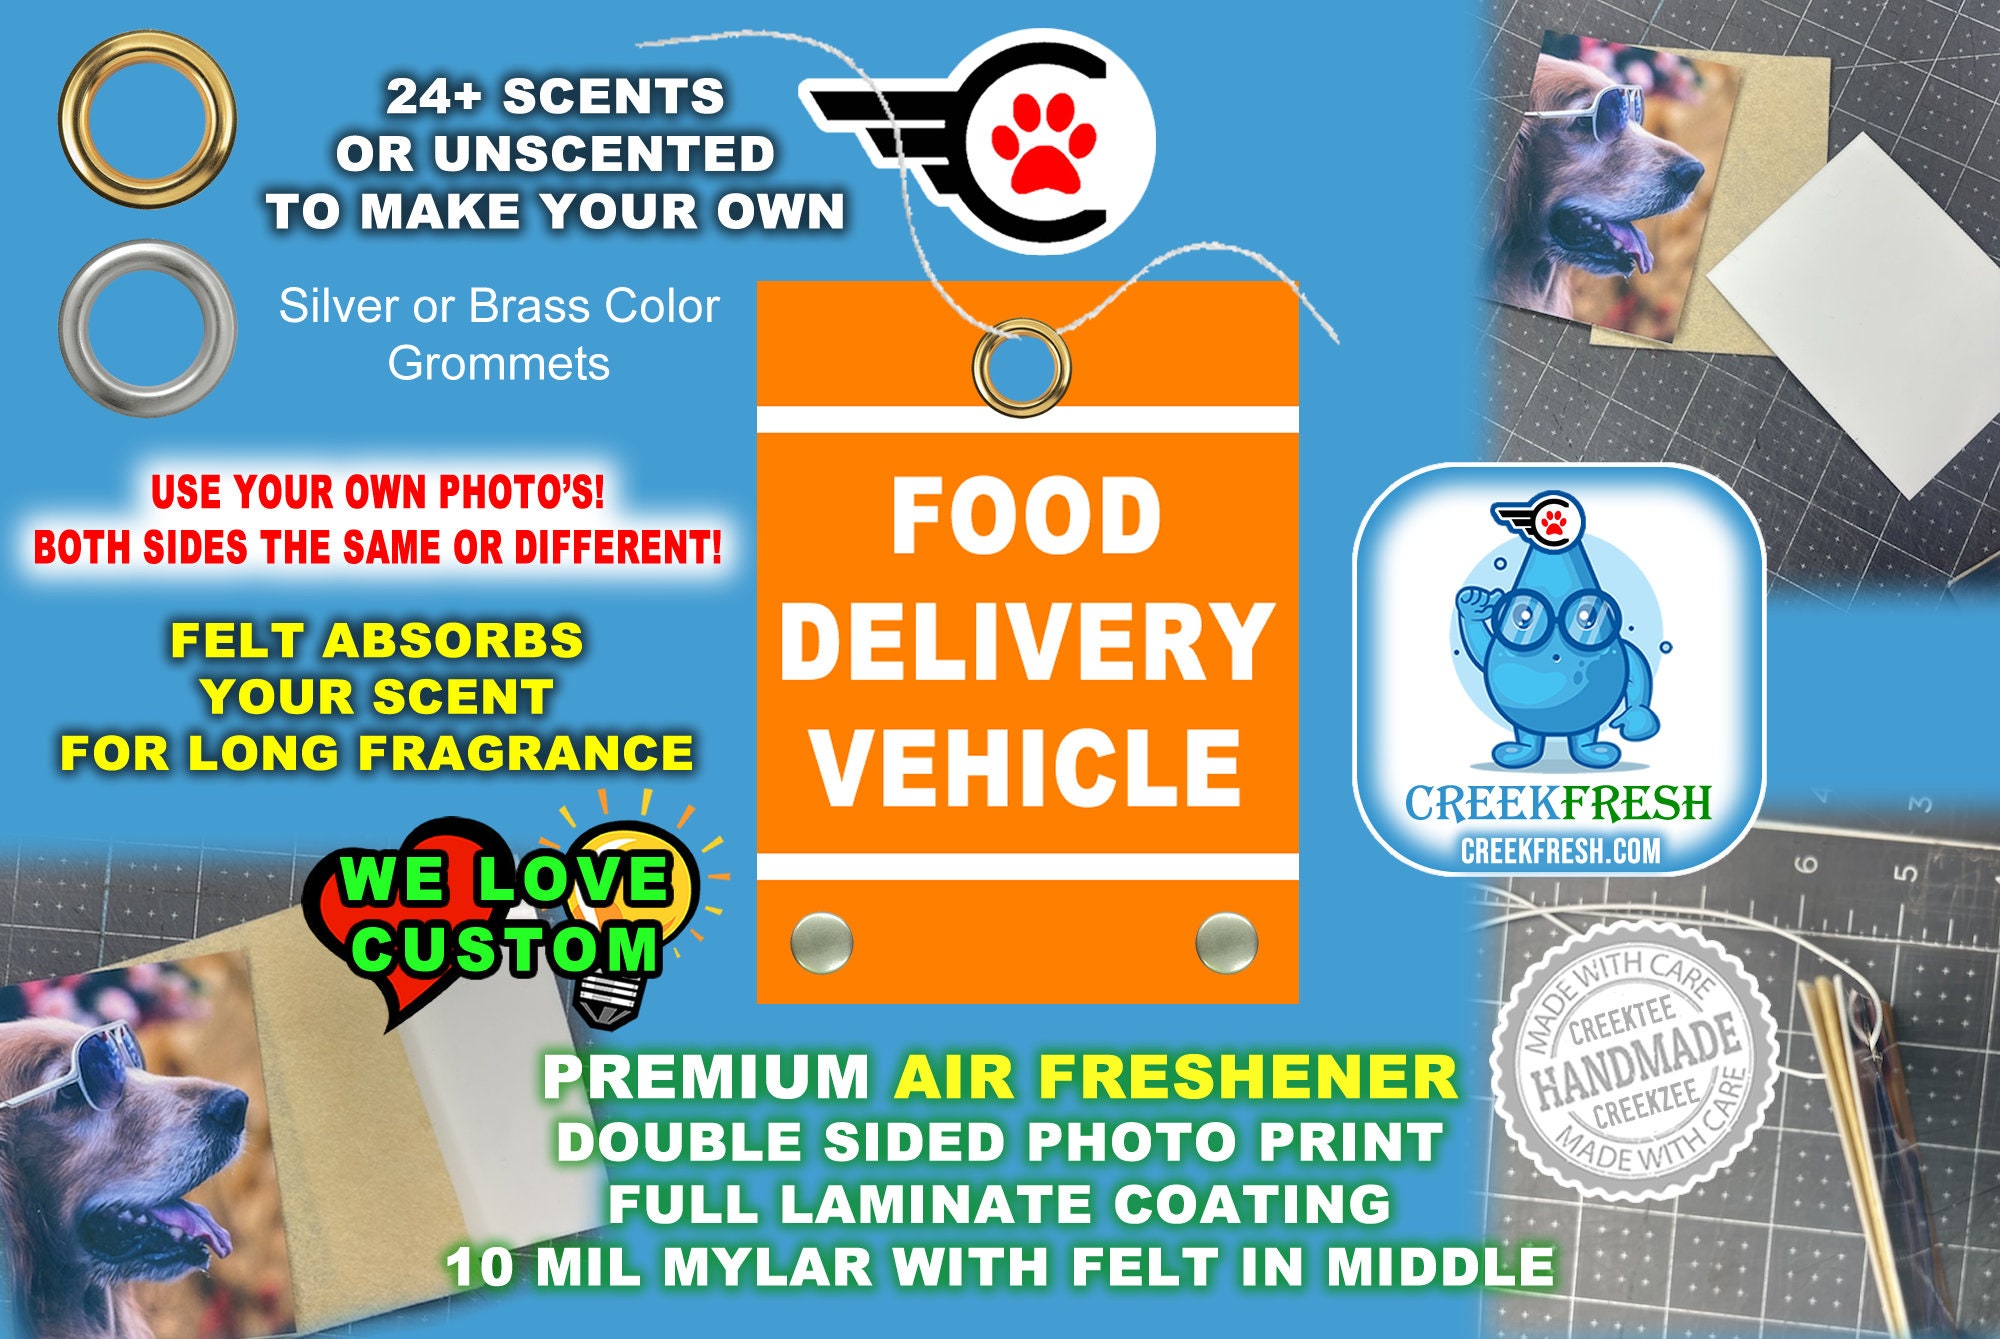 Food Delivery Vehicle - Premium Car Air Freshener Color Print +Felt middle fragrance absorption. Scent or Non-Scent. Both Sides.